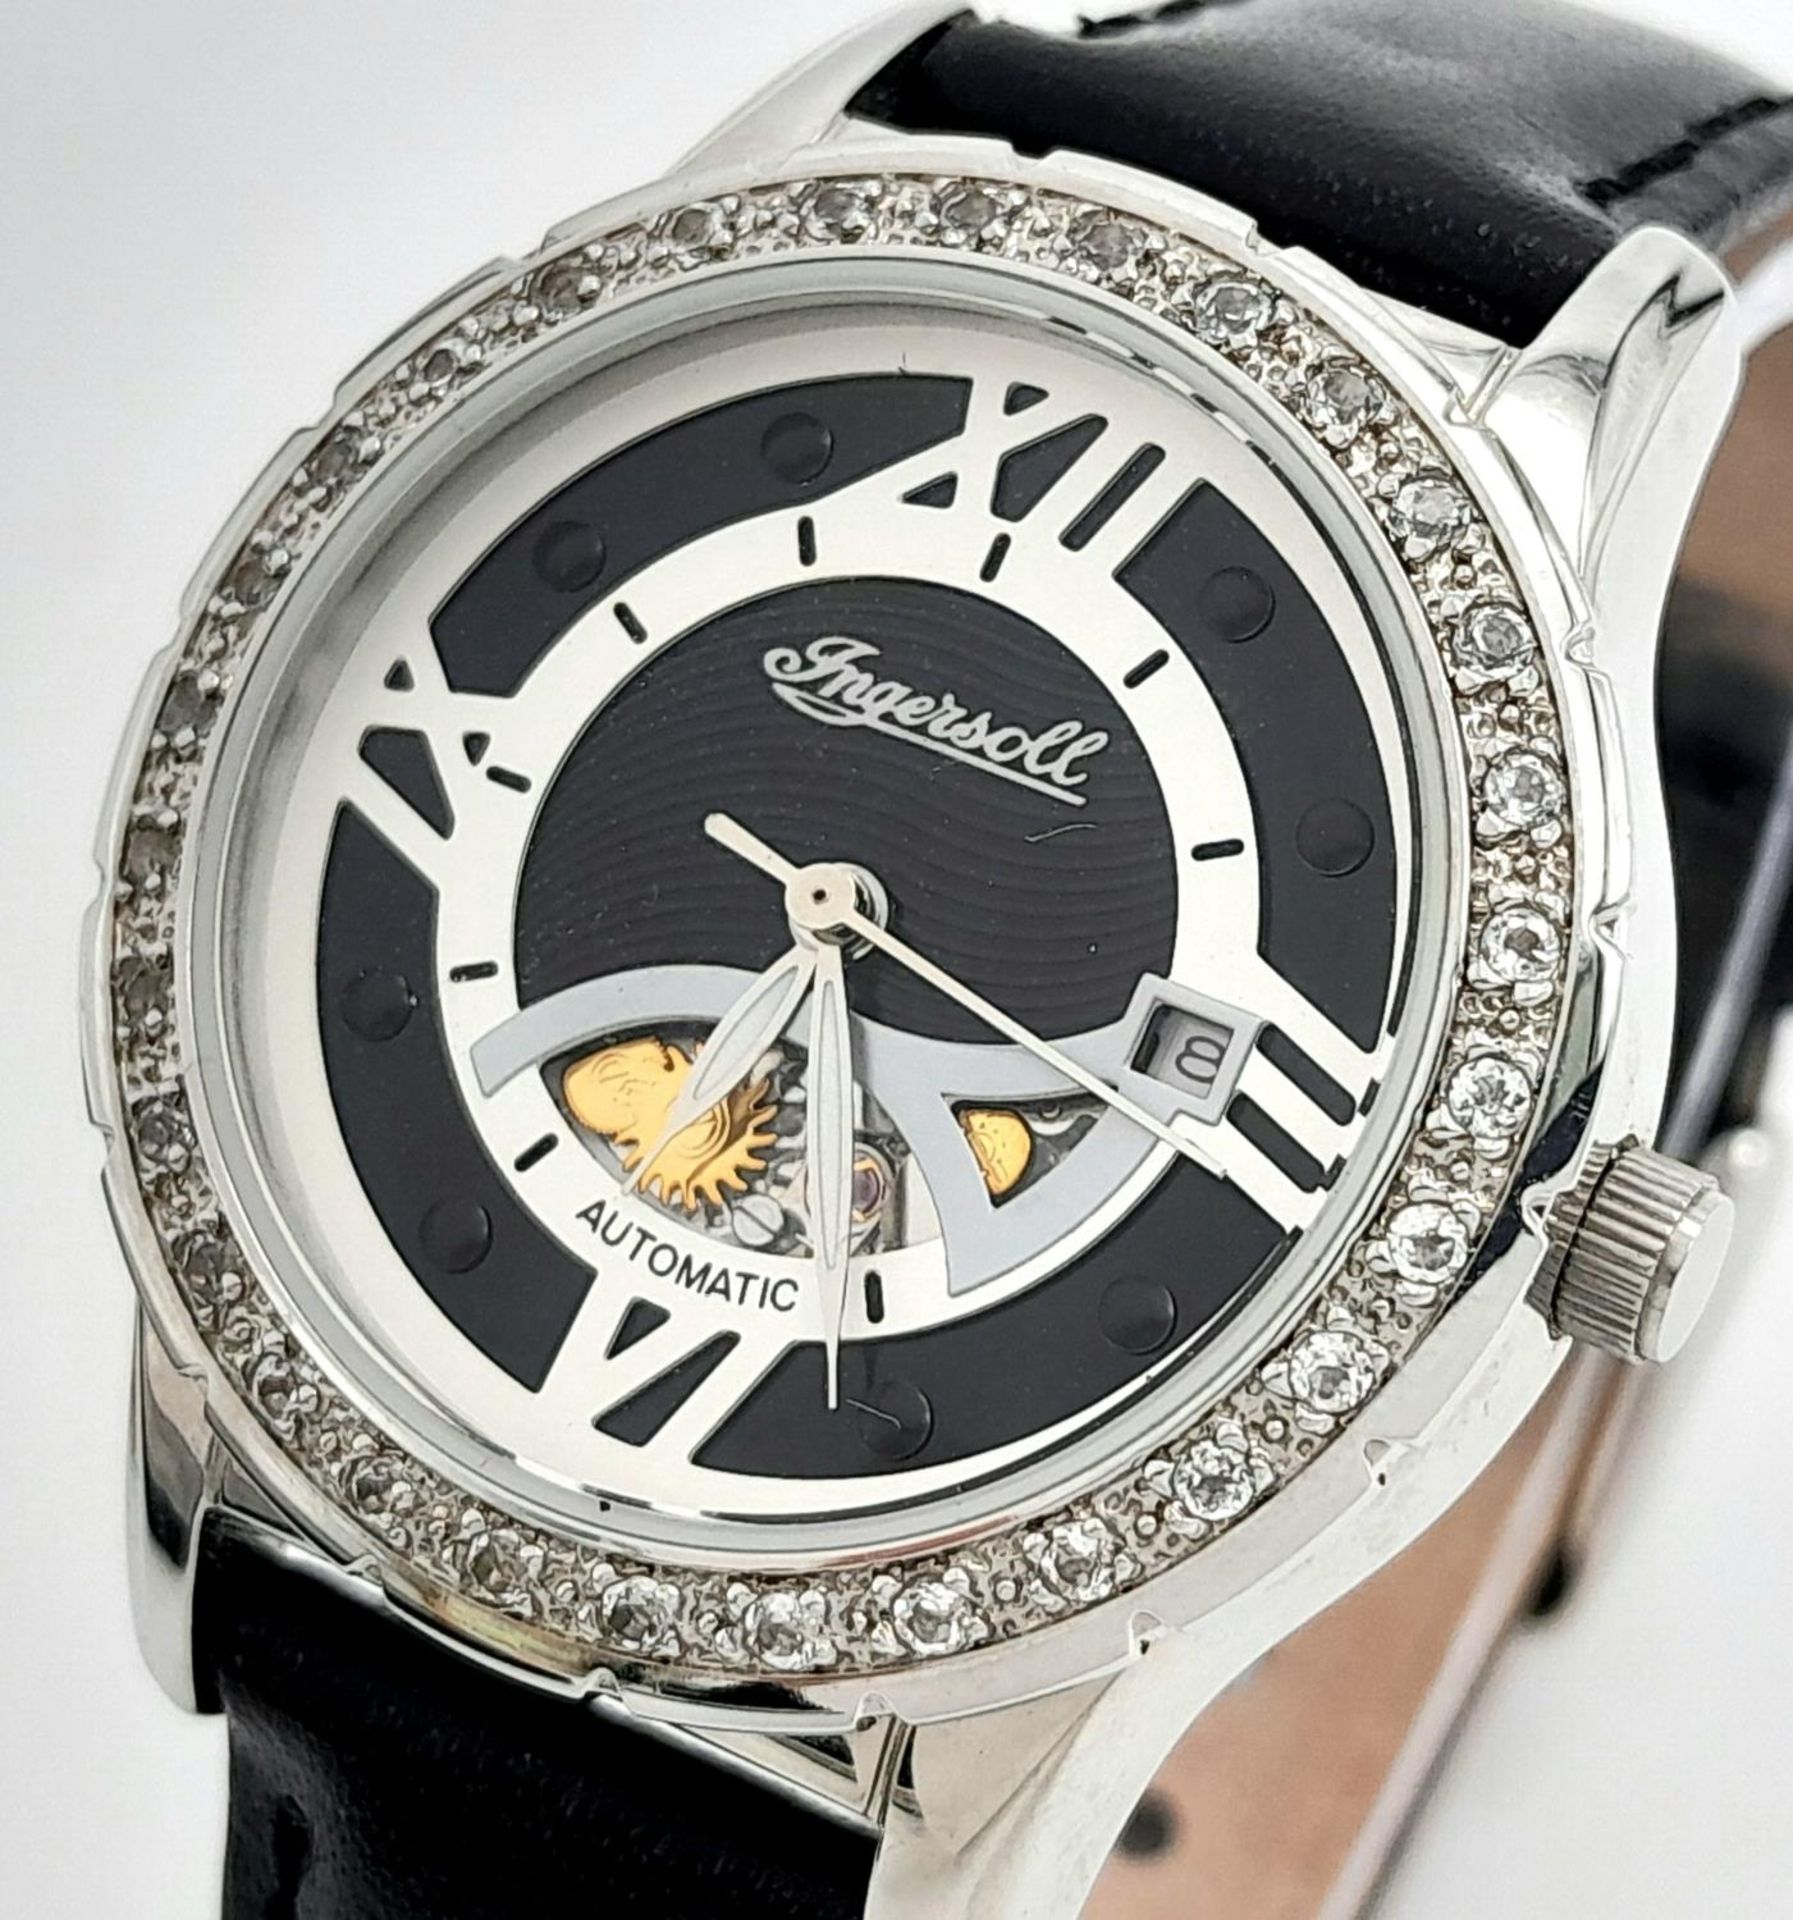 An Ingersoll Automatic Skeleton Ladies Watch. Black leather strap. Stainless steel case - 32mm. - Image 2 of 6